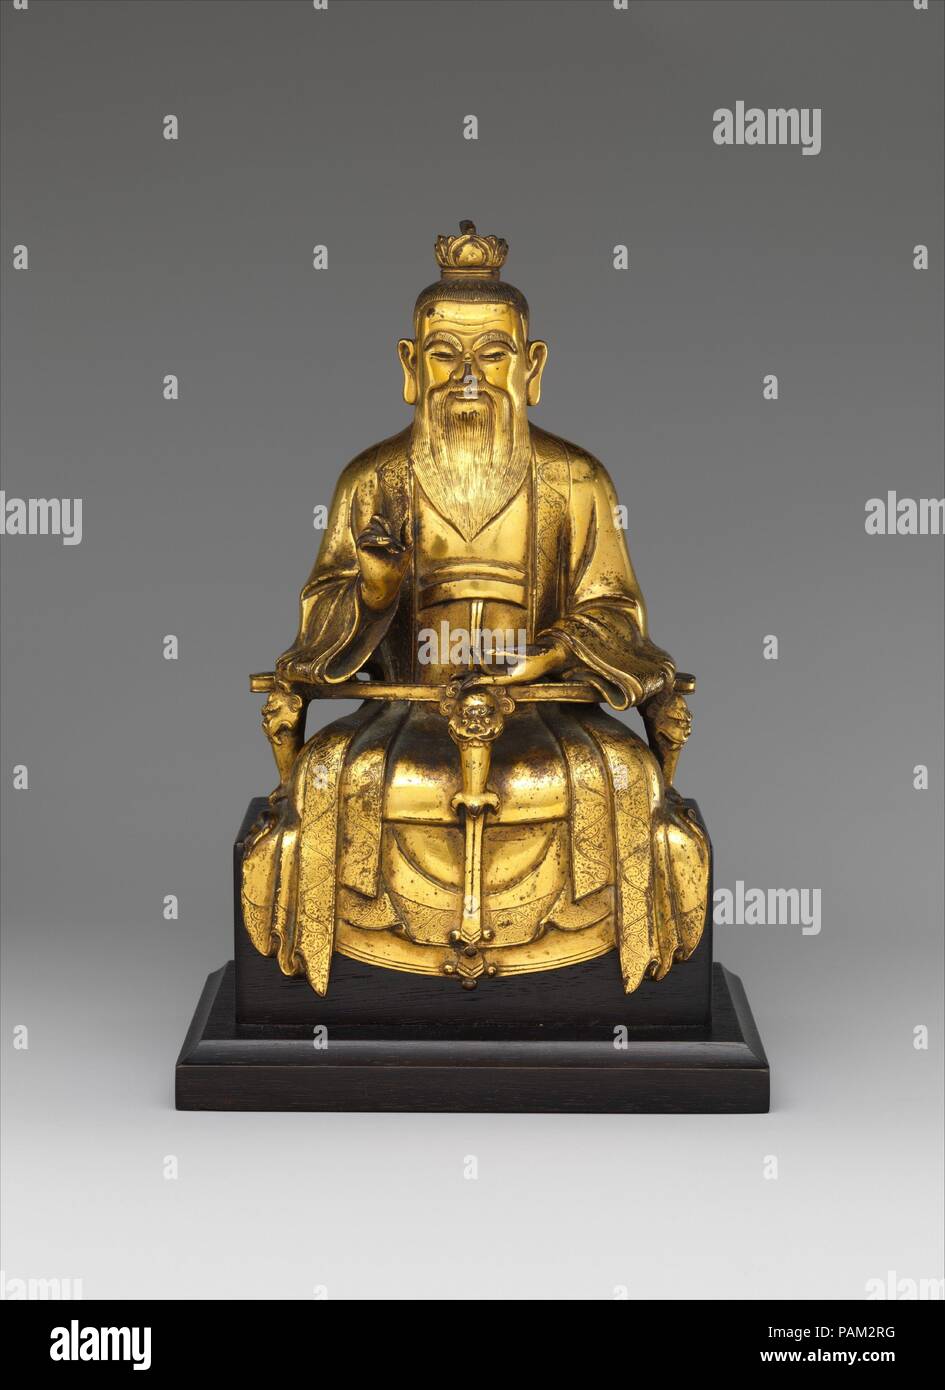 Daoist Immortal Laozi. Artist: Chen Yanqing (active 15th century). Culture: China. Dimensions: H. 7 1/2 in. (19 cm); W. 4 3/4 in. (12 cm); D. 2 3/4 in. (7 cm). Date: dated 1438.  The full beard helps to identify this figure as Laozi (also known as the Celestial Worthy of the Way and Its Virtue), the author of the seminal Daoist text the Daodejing (The Way and Its Power). Daoism, a term used to define an amalgamation of beliefs and practices that includes metaphysical and philosophical speculations as well as more mundane attempts to achieve immortality, can be traced to the sixth century B.C.  Stock Photo